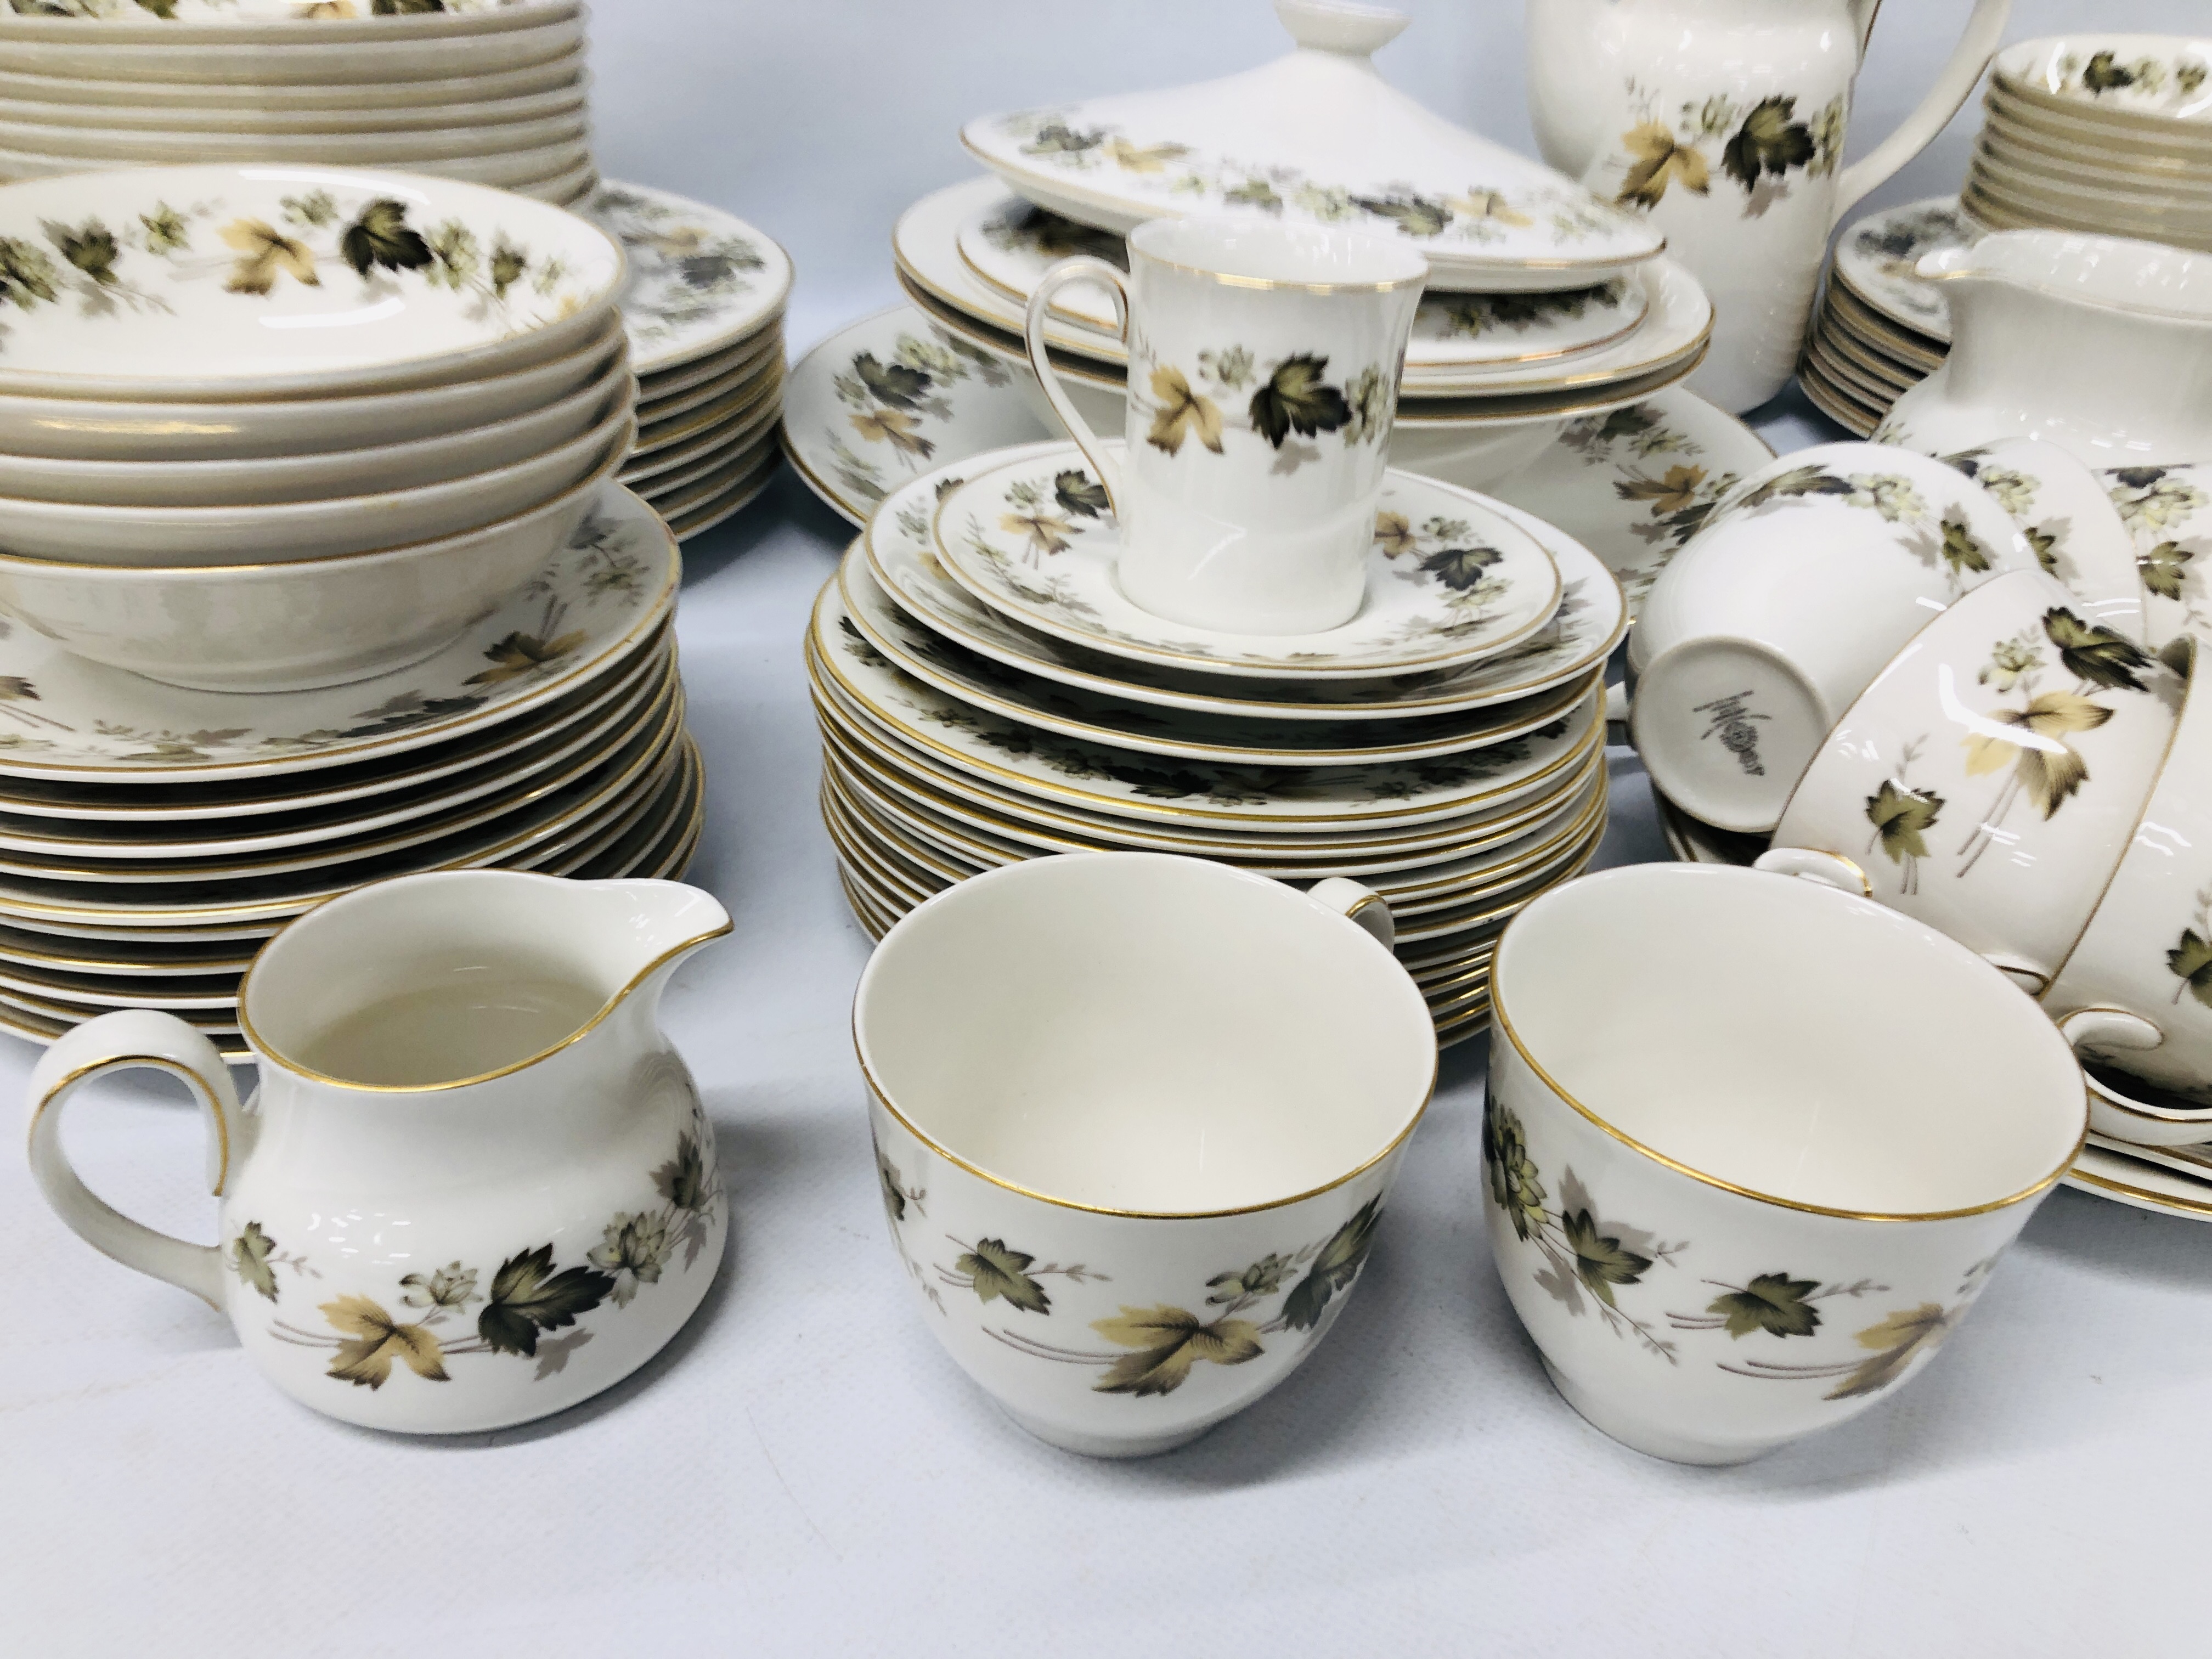 COLLECTION OF ROYAL DOULTON "LARCHMONT" TC1019 TEA AND DINNER WARE (APPROX. - Image 6 of 9